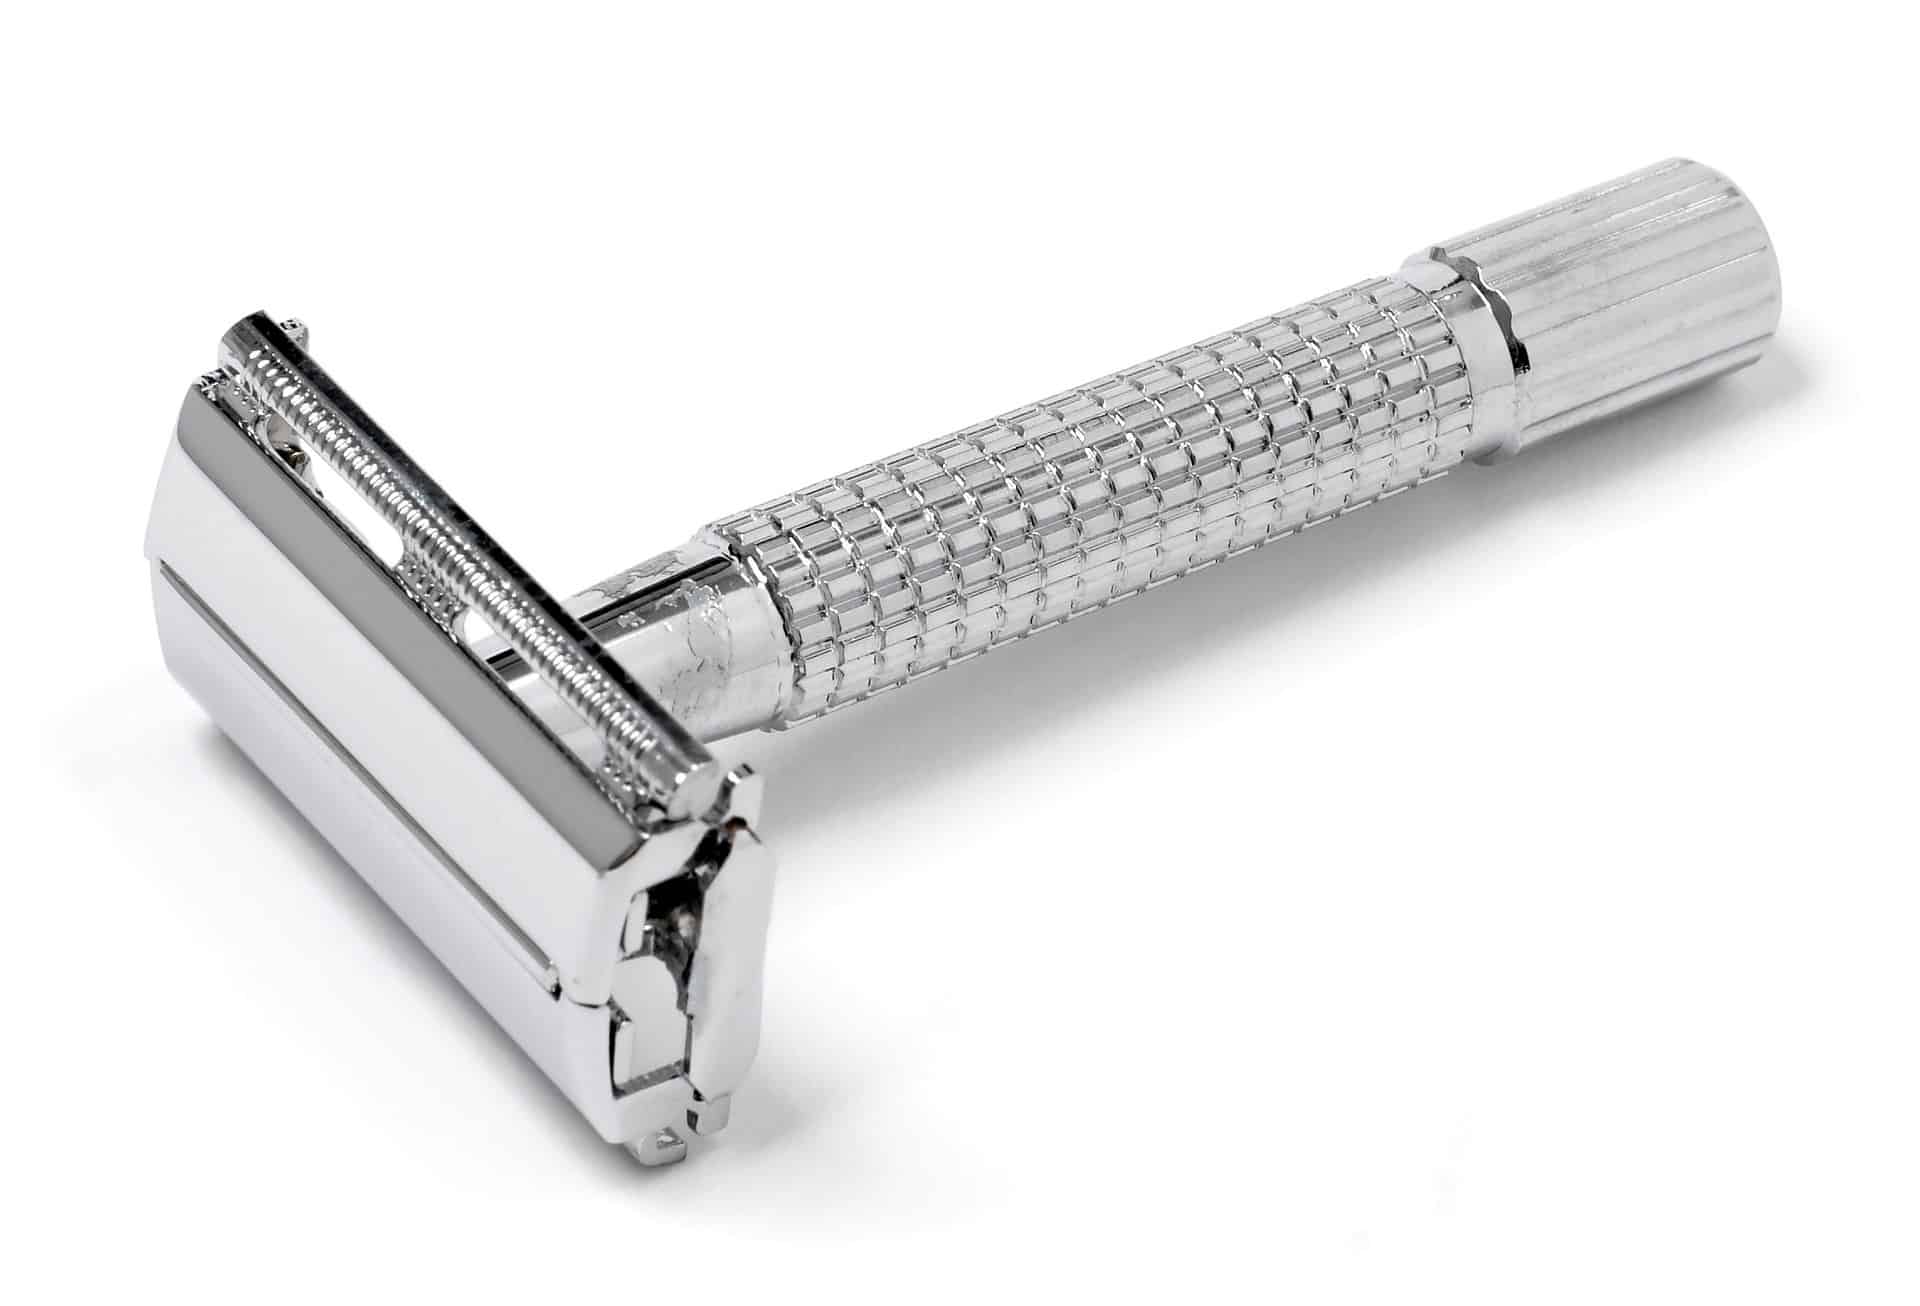 What is the best razor for first time shaver success?